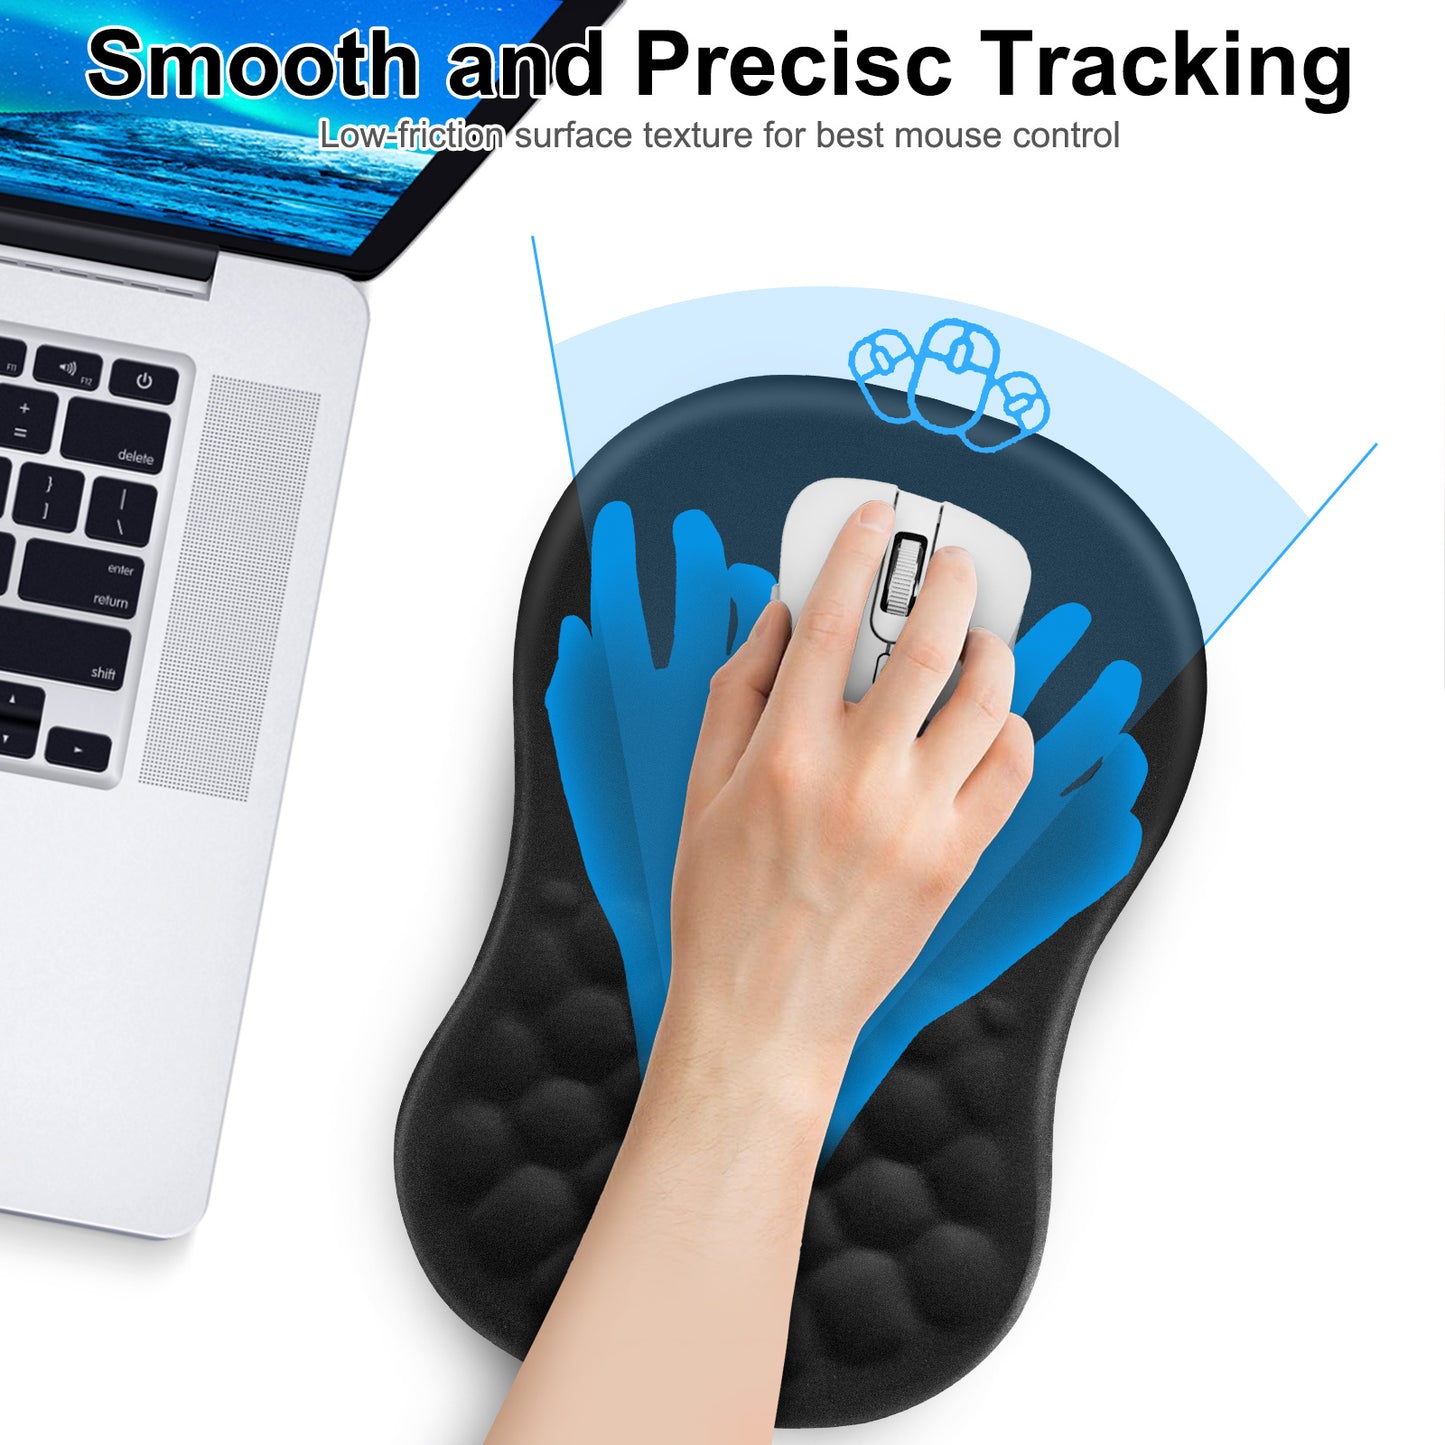 Ergonomic Wrist Support Mouse Pad - Wrist Rest with Memory Foam and Non-Slip PU Base for Pain Relief and Enhanced Functionality in Computer Activities (Black)